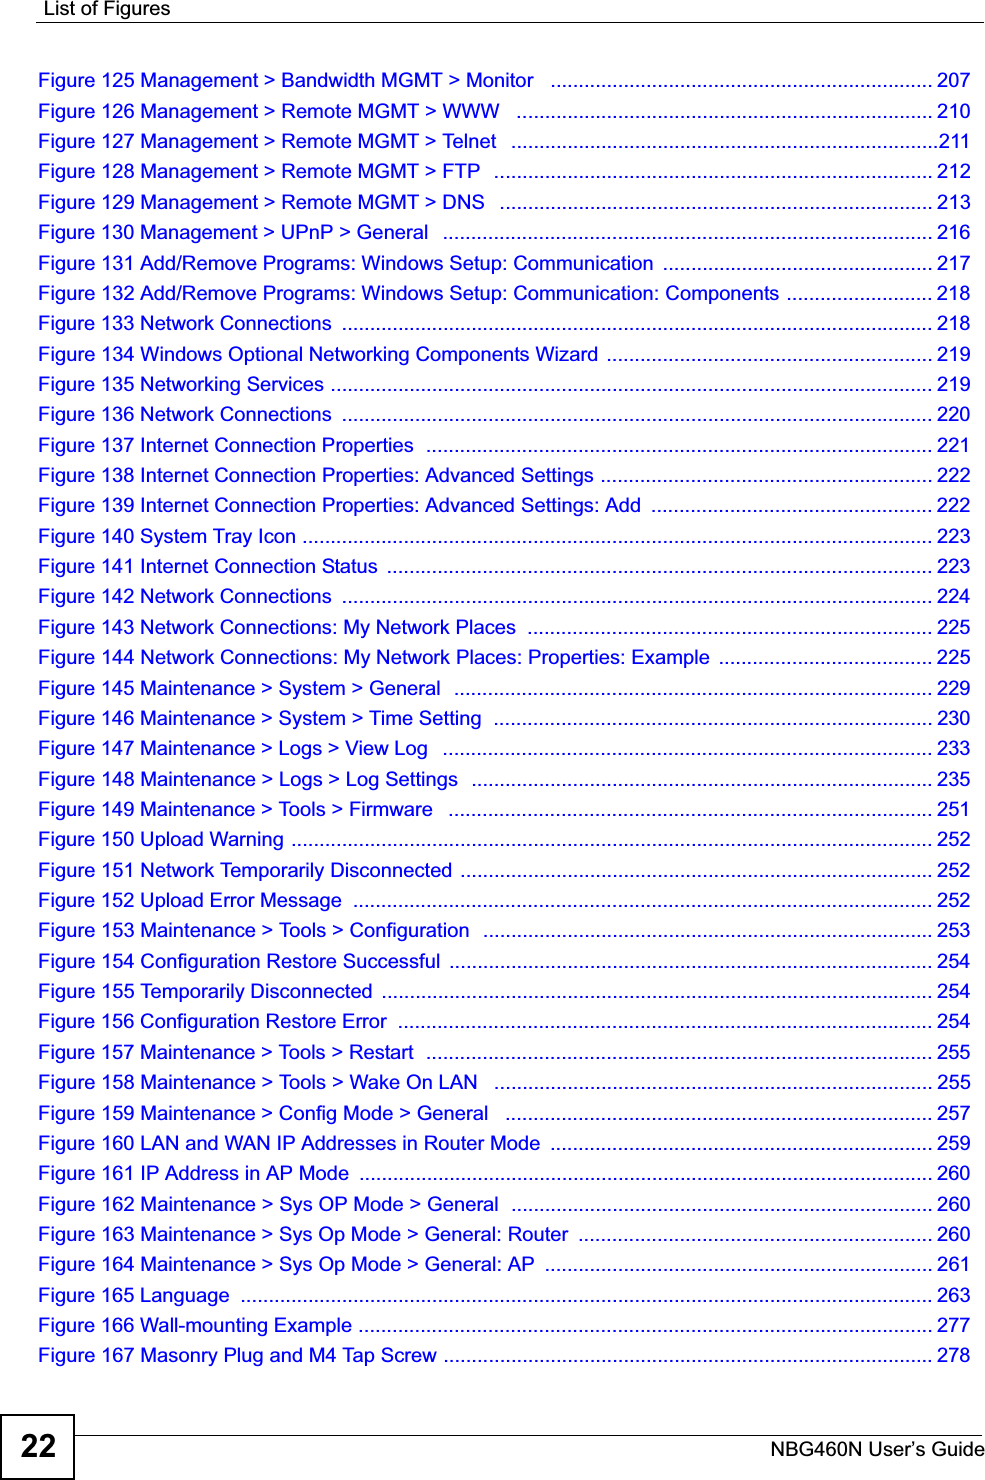 List of FiguresNBG460N User’s Guide22Figure 125 Management &gt; Bandwidth MGMT &gt; Monitor   .................................................................... 207Figure 126 Management &gt; Remote MGMT &gt; WWW   .......................................................................... 210Figure 127 Management &gt; Remote MGMT &gt; Telnet   ............................................................................211Figure 128 Management &gt; Remote MGMT &gt; FTP  .............................................................................. 212Figure 129 Management &gt; Remote MGMT &gt; DNS   ............................................................................. 213Figure 130 Management &gt; UPnP &gt; General   ....................................................................................... 216Figure 131 Add/Remove Programs: Windows Setup: Communication  ................................................ 217Figure 132 Add/Remove Programs: Windows Setup: Communication: Components .......................... 218Figure 133 Network Connections  ......................................................................................................... 218Figure 134 Windows Optional Networking Components Wizard  .......................................................... 219Figure 135 Networking Services ........................................................................................................... 219Figure 136 Network Connections  ......................................................................................................... 220Figure 137 Internet Connection Properties  .......................................................................................... 221Figure 138 Internet Connection Properties: Advanced Settings ........................................................... 222Figure 139 Internet Connection Properties: Advanced Settings: Add  .................................................. 222Figure 140 System Tray Icon ................................................................................................................ 223Figure 141 Internet Connection Status  ................................................................................................. 223Figure 142 Network Connections  ......................................................................................................... 224Figure 143 Network Connections: My Network Places  ........................................................................ 225Figure 144 Network Connections: My Network Places: Properties: Example  ...................................... 225Figure 145 Maintenance &gt; System &gt; General  .....................................................................................229Figure 146 Maintenance &gt; System &gt; Time Setting  .............................................................................. 230Figure 147 Maintenance &gt; Logs &gt; View Log   ....................................................................................... 233Figure 148 Maintenance &gt; Logs &gt; Log Settings  ..................................................................................235Figure 149 Maintenance &gt; Tools &gt; Firmware   ...................................................................................... 251Figure 150 Upload Warning .................................................................................................................. 252Figure 151 Network Temporarily Disconnected ....................................................................................252Figure 152 Upload Error Message  ....................................................................................................... 252Figure 153 Maintenance &gt; Tools &gt; Configuration  ................................................................................253Figure 154 Configuration Restore Successful  ...................................................................................... 254Figure 155 Temporarily Disconnected  .................................................................................................. 254Figure 156 Configuration Restore Error  ............................................................................................... 254Figure 157 Maintenance &gt; Tools &gt; Restart  .......................................................................................... 255Figure 158 Maintenance &gt; Tools &gt; Wake On LAN   .............................................................................. 255Figure 159 Maintenance &gt; Config Mode &gt; General   ............................................................................ 257Figure 160 LAN and WAN IP Addresses in Router Mode  .................................................................... 259Figure 161 IP Address in AP Mode  ...................................................................................................... 260Figure 162 Maintenance &gt; Sys OP Mode &gt; General  ........................................................................... 260Figure 163 Maintenance &gt; Sys Op Mode &gt; General: Router  ............................................................... 260Figure 164 Maintenance &gt; Sys Op Mode &gt; General: AP  ..................................................................... 261Figure 165 Language  ........................................................................................................................... 263Figure 166 Wall-mounting Example ...................................................................................................... 277Figure 167 Masonry Plug and M4 Tap Screw .......................................................................................278